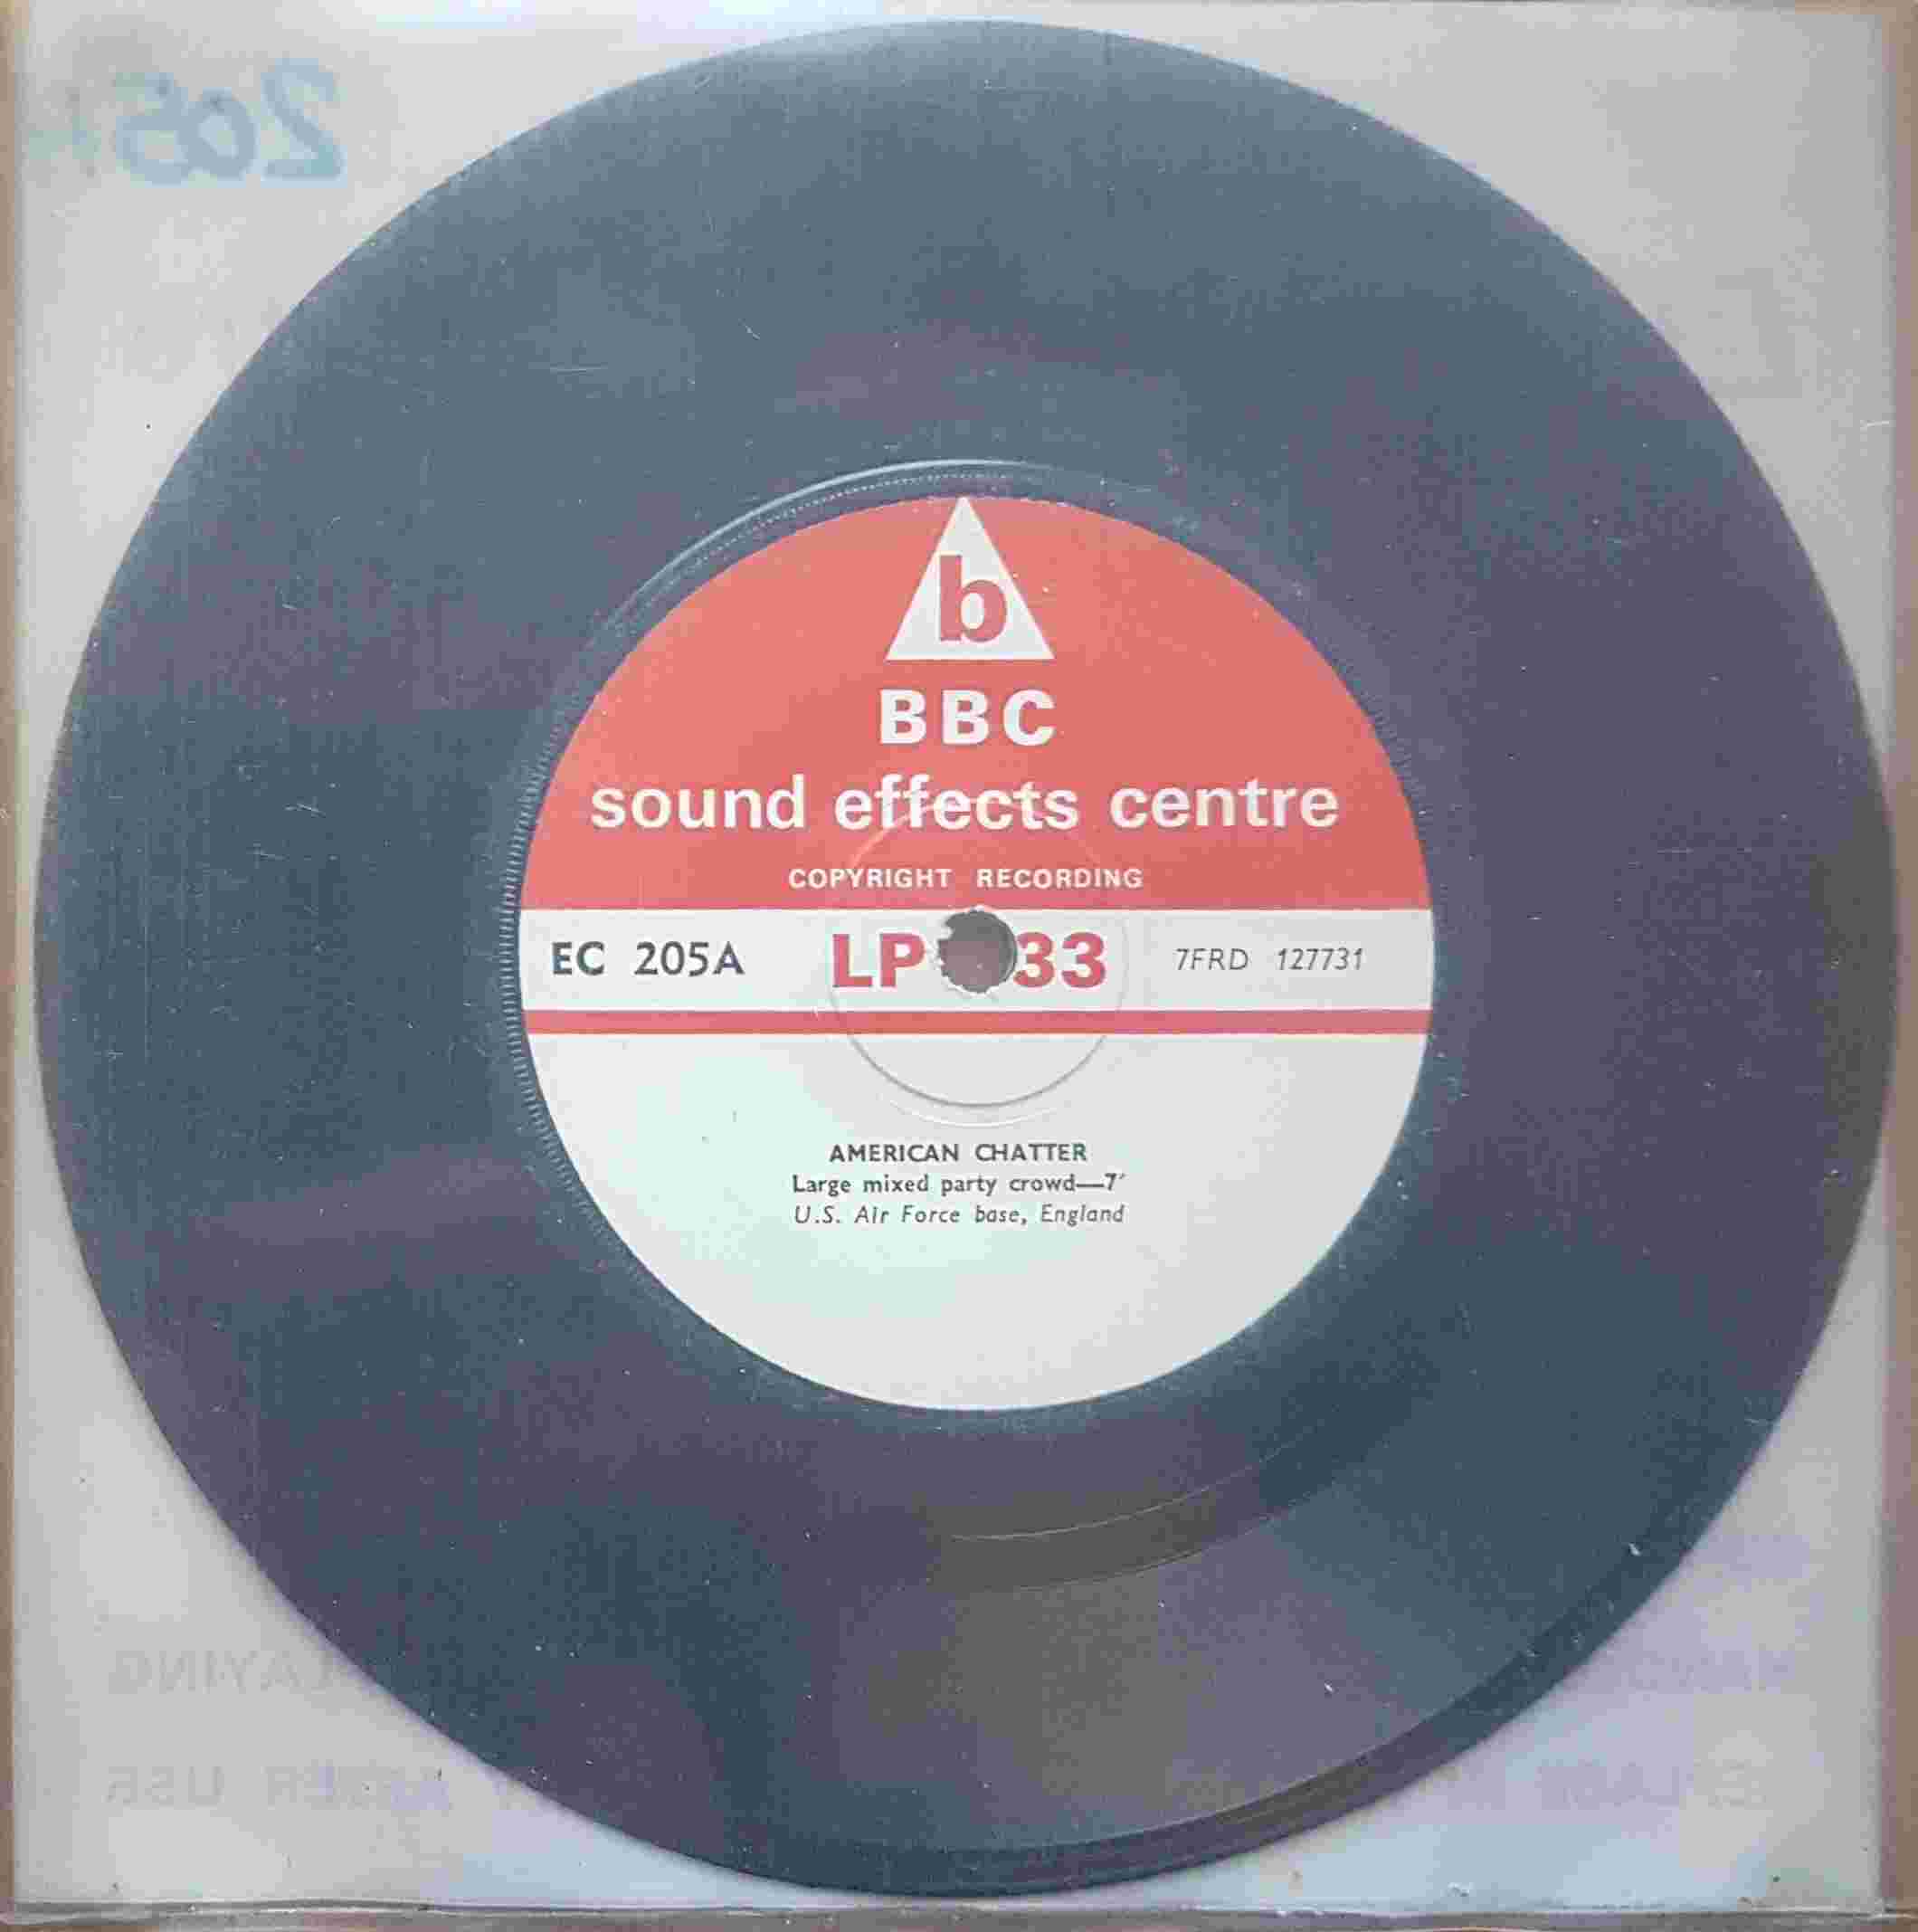 Picture of EC 205A American chatter by artist Not registered from the BBC records and Tapes library